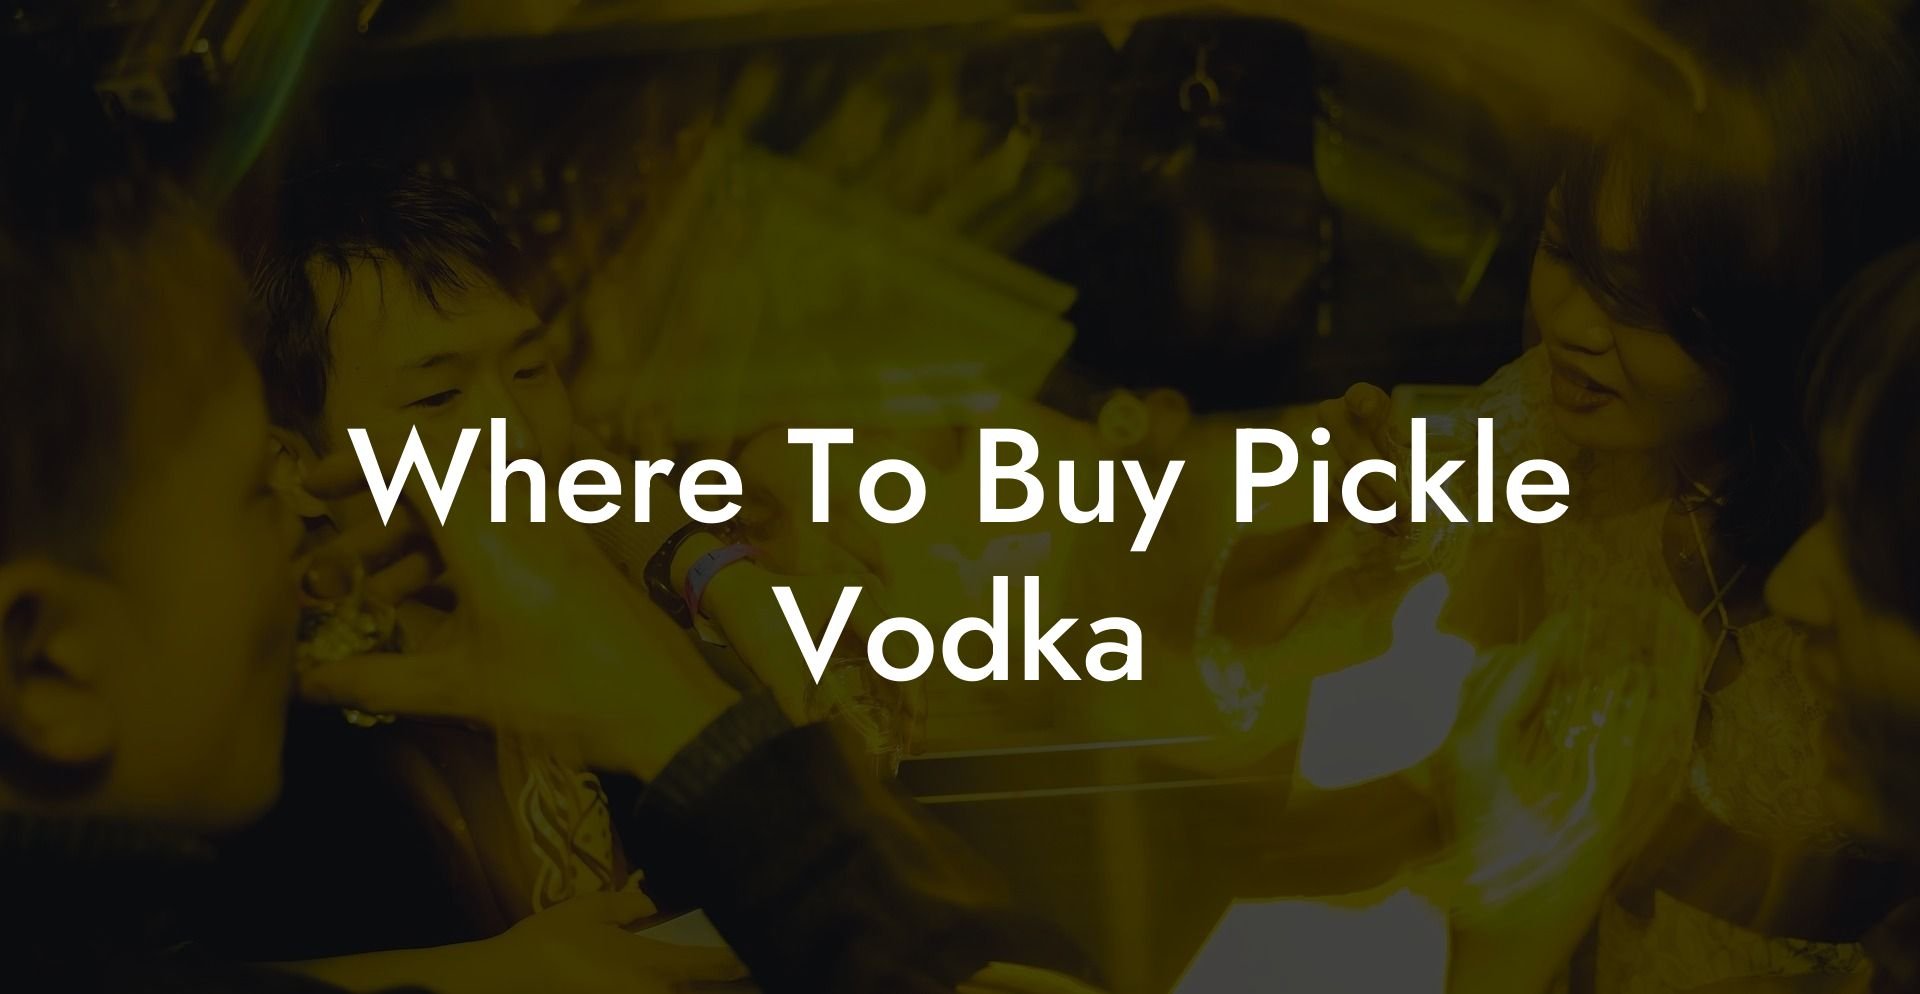 Where To Buy Pickle Vodka